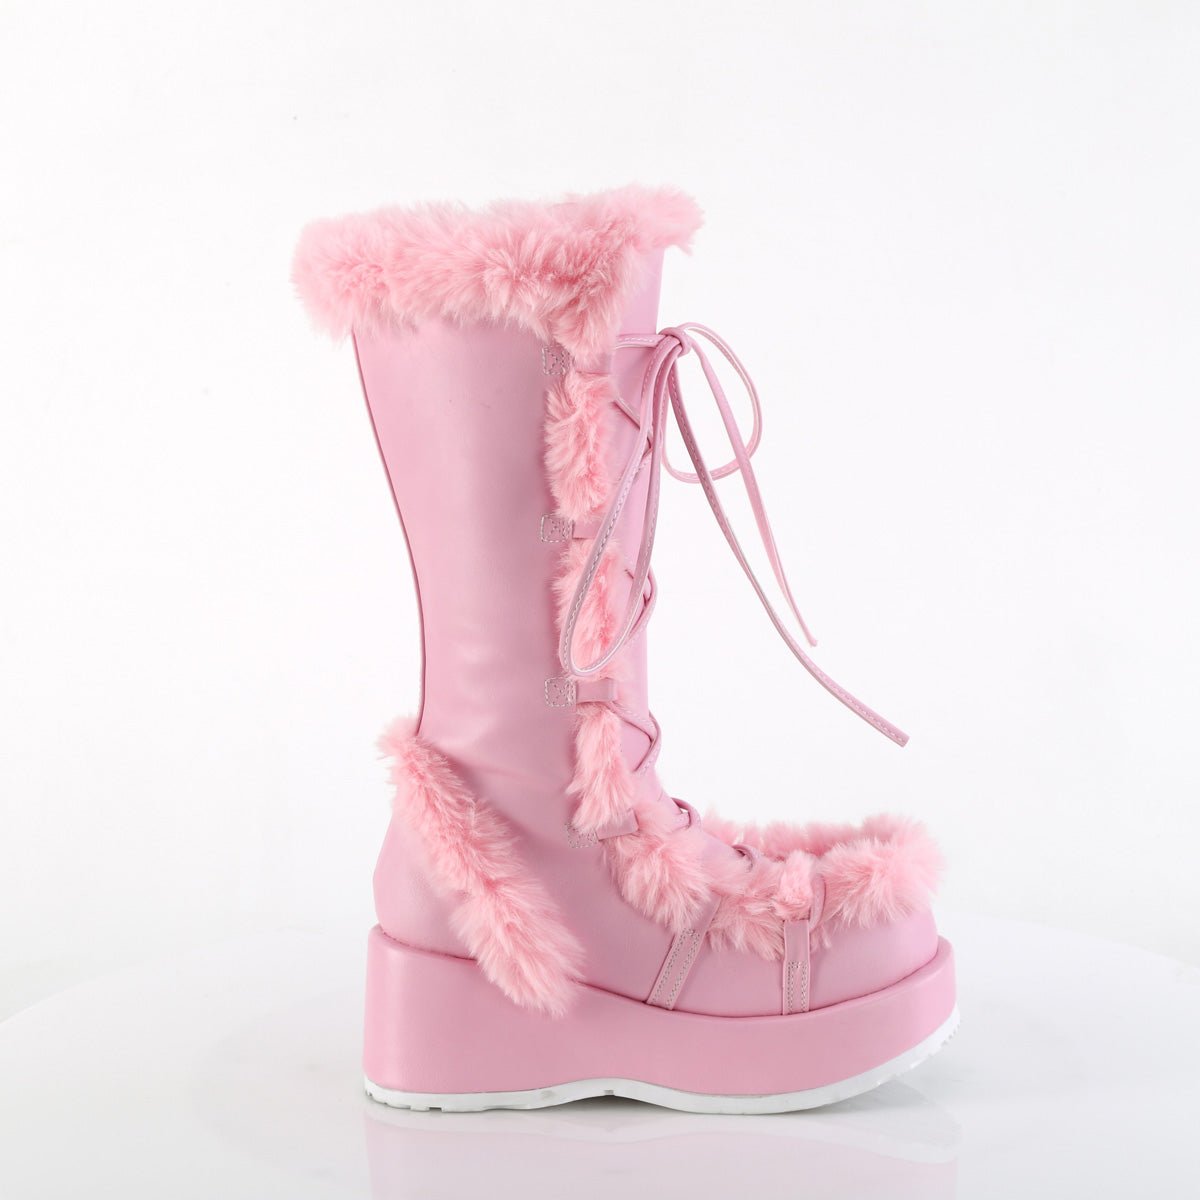 Too Fast | Demonia Cubby 311 | Baby Pink Vegan Leather Women's Mid Calf Boots